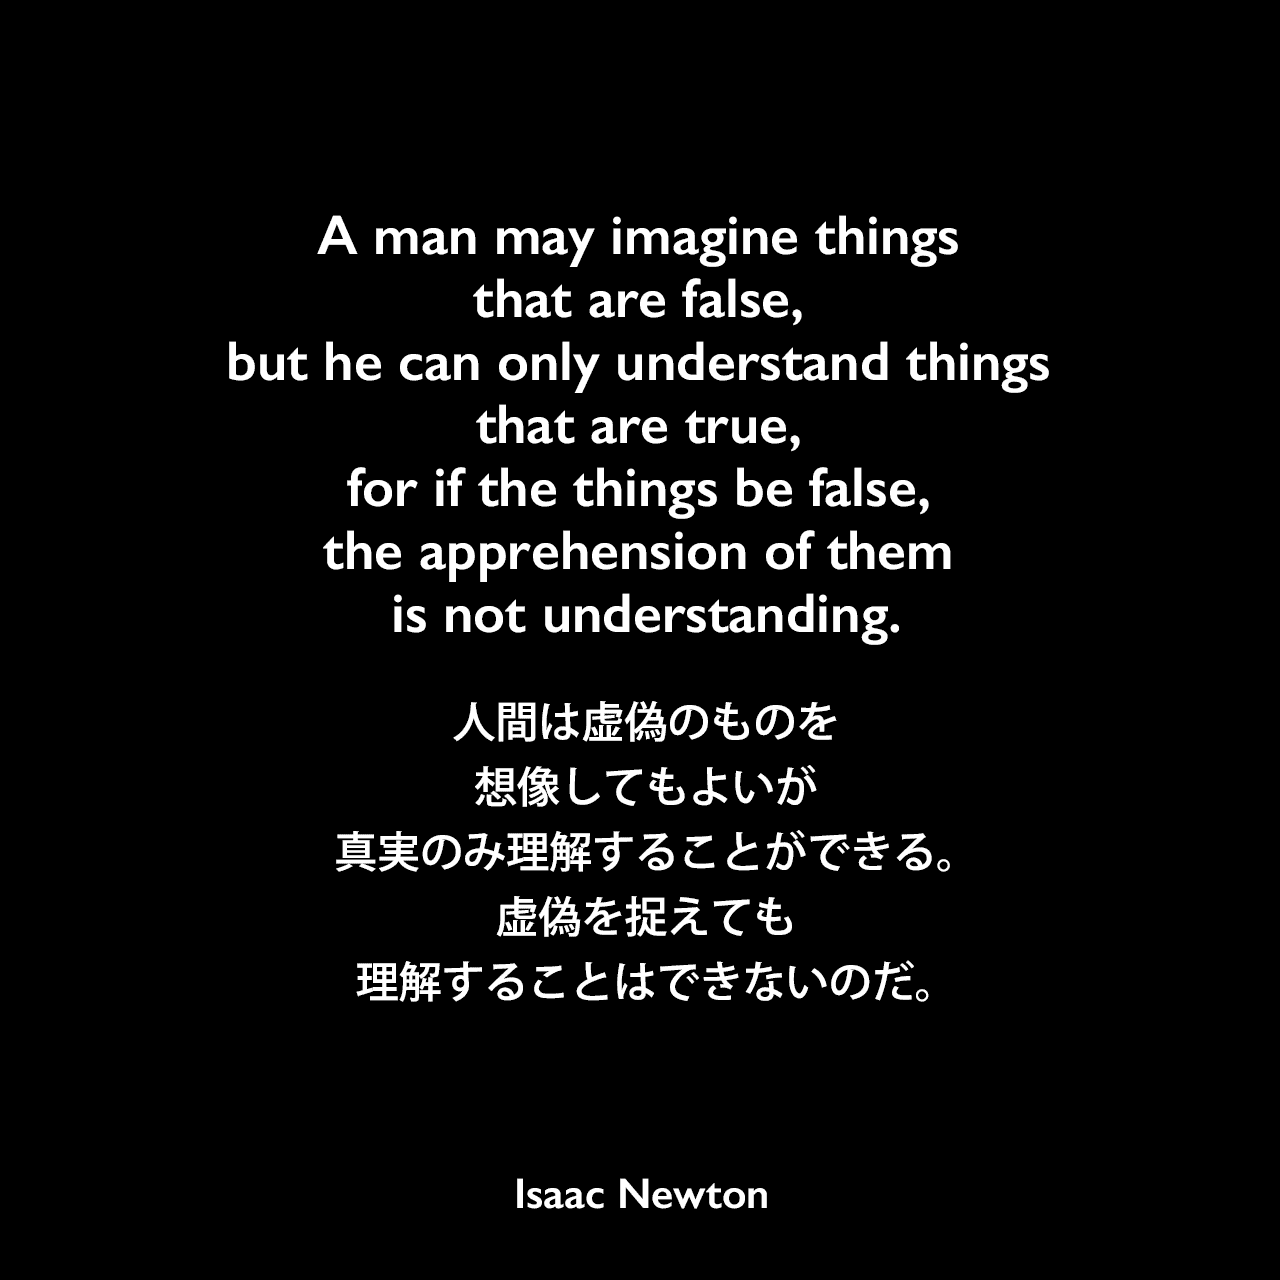 A man may imagine things that are false, but he can only understand things that are true, for if the things be false, the apprehension of them is not understanding.人間は虚偽のものを想像してもよいが、真実のみ理解することができる。虚偽を捉えても理解することはできないのだ。Isaac Newton